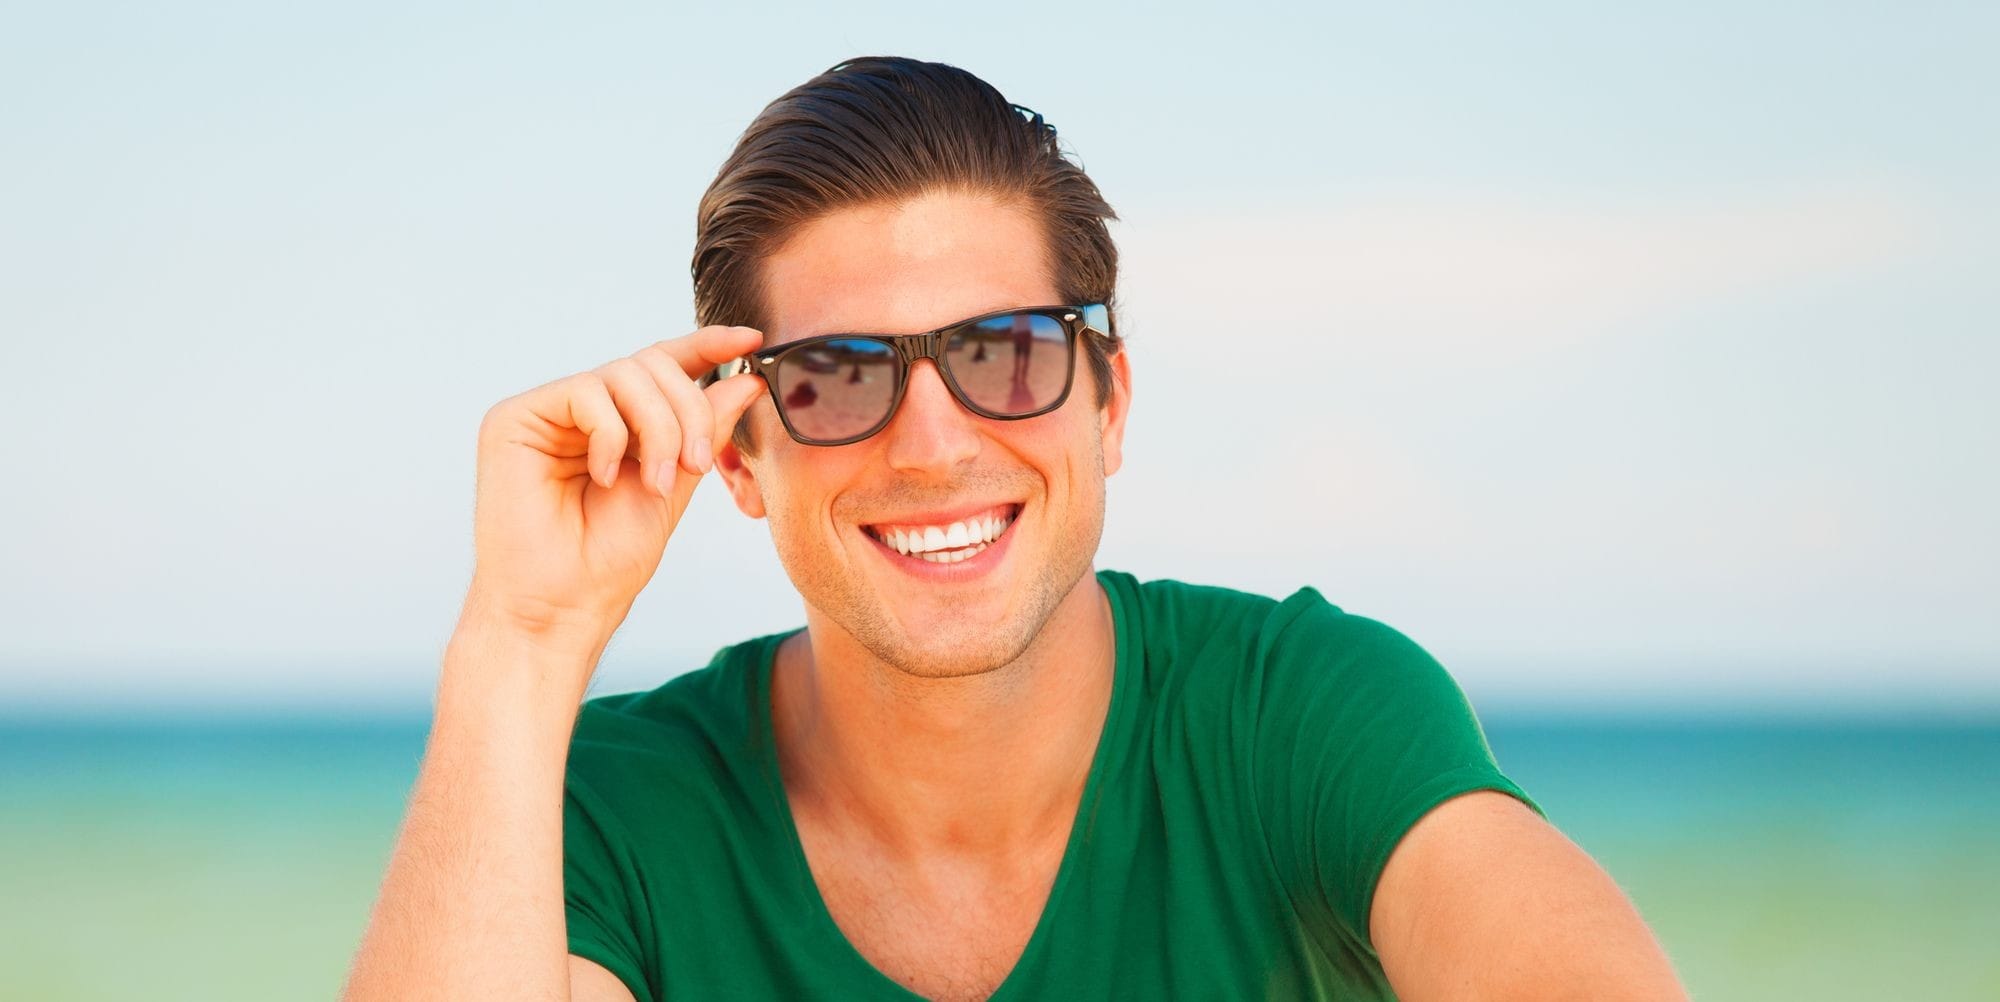 Man Smiling Holding His Sunglasses